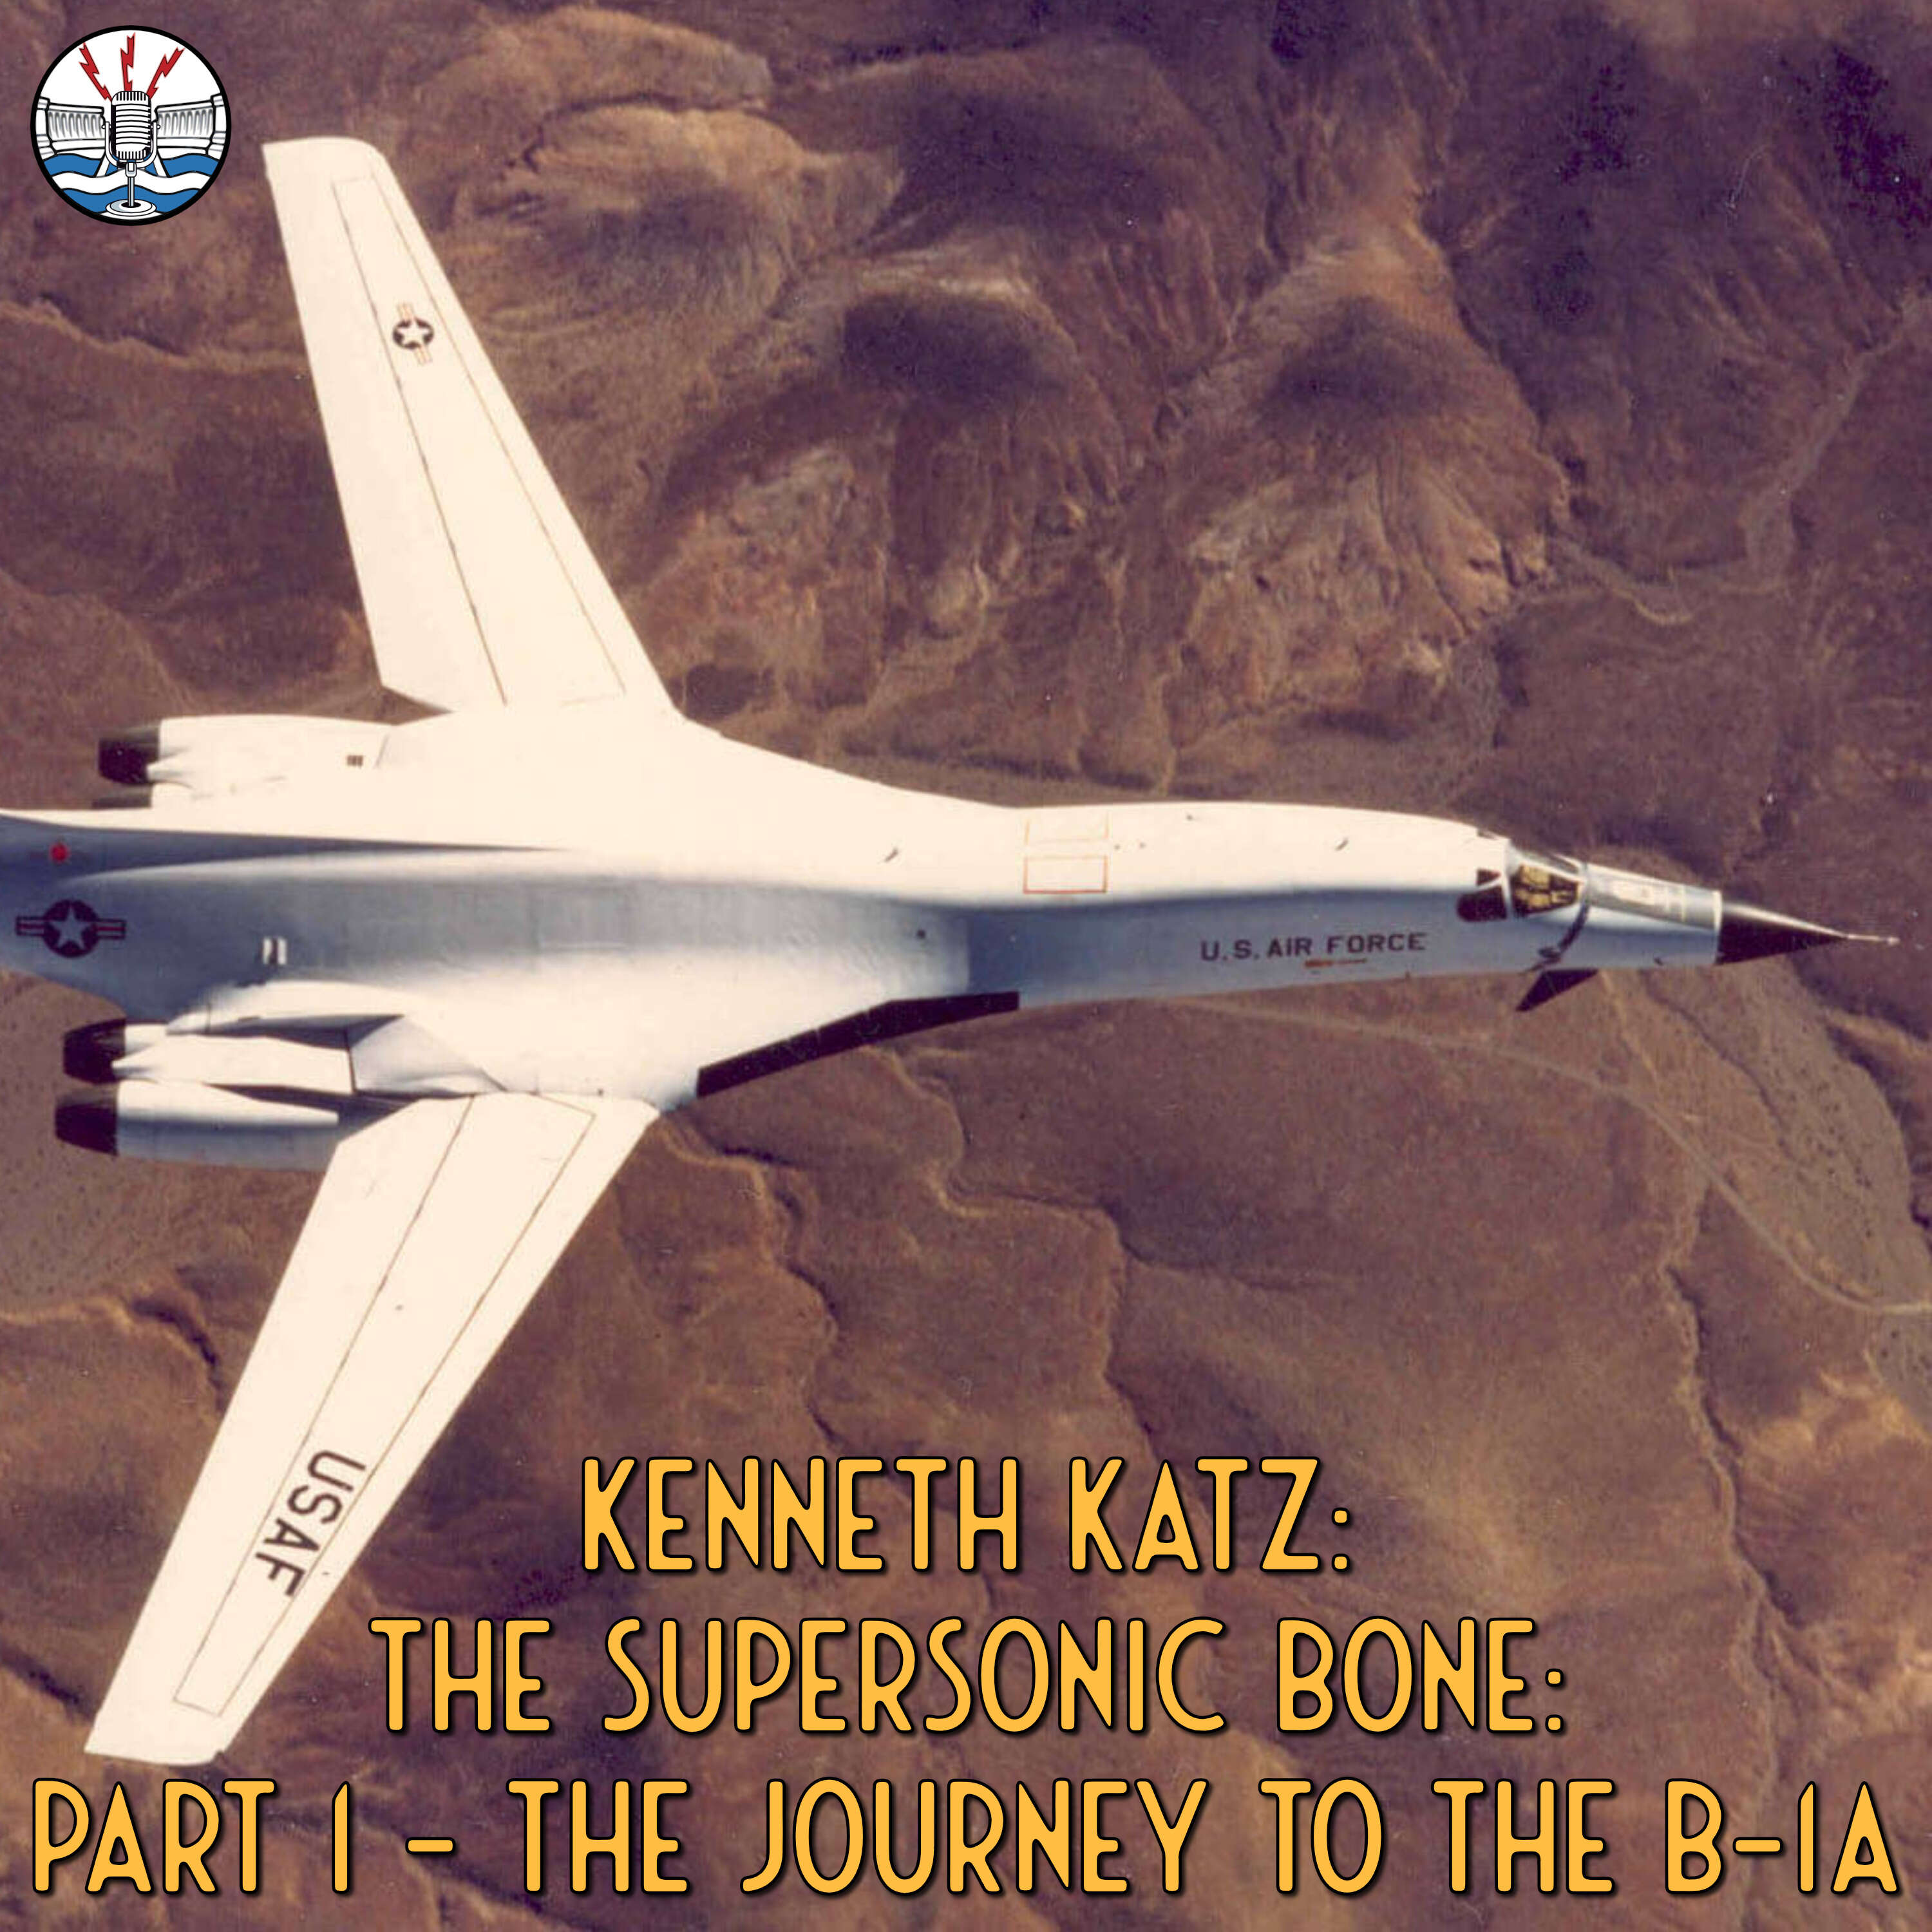 Kenneth Katz: The Supersonic BONE: Part 1 - The Journey to the B-1A